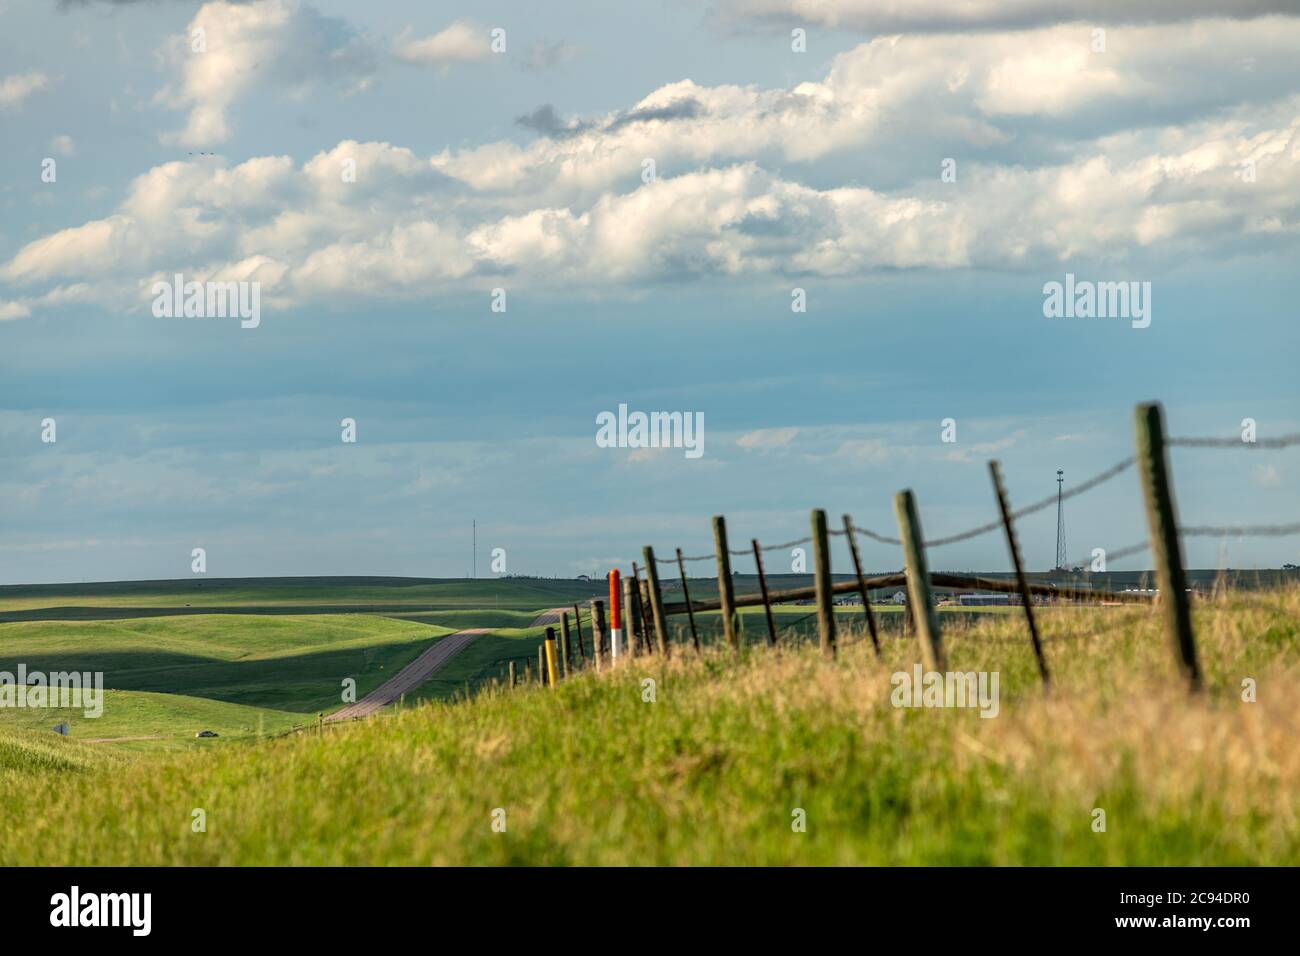 A rolling farmland scene shows the green expanse and farming fencing used to keep cattle from entering the roadway. Stock Photo